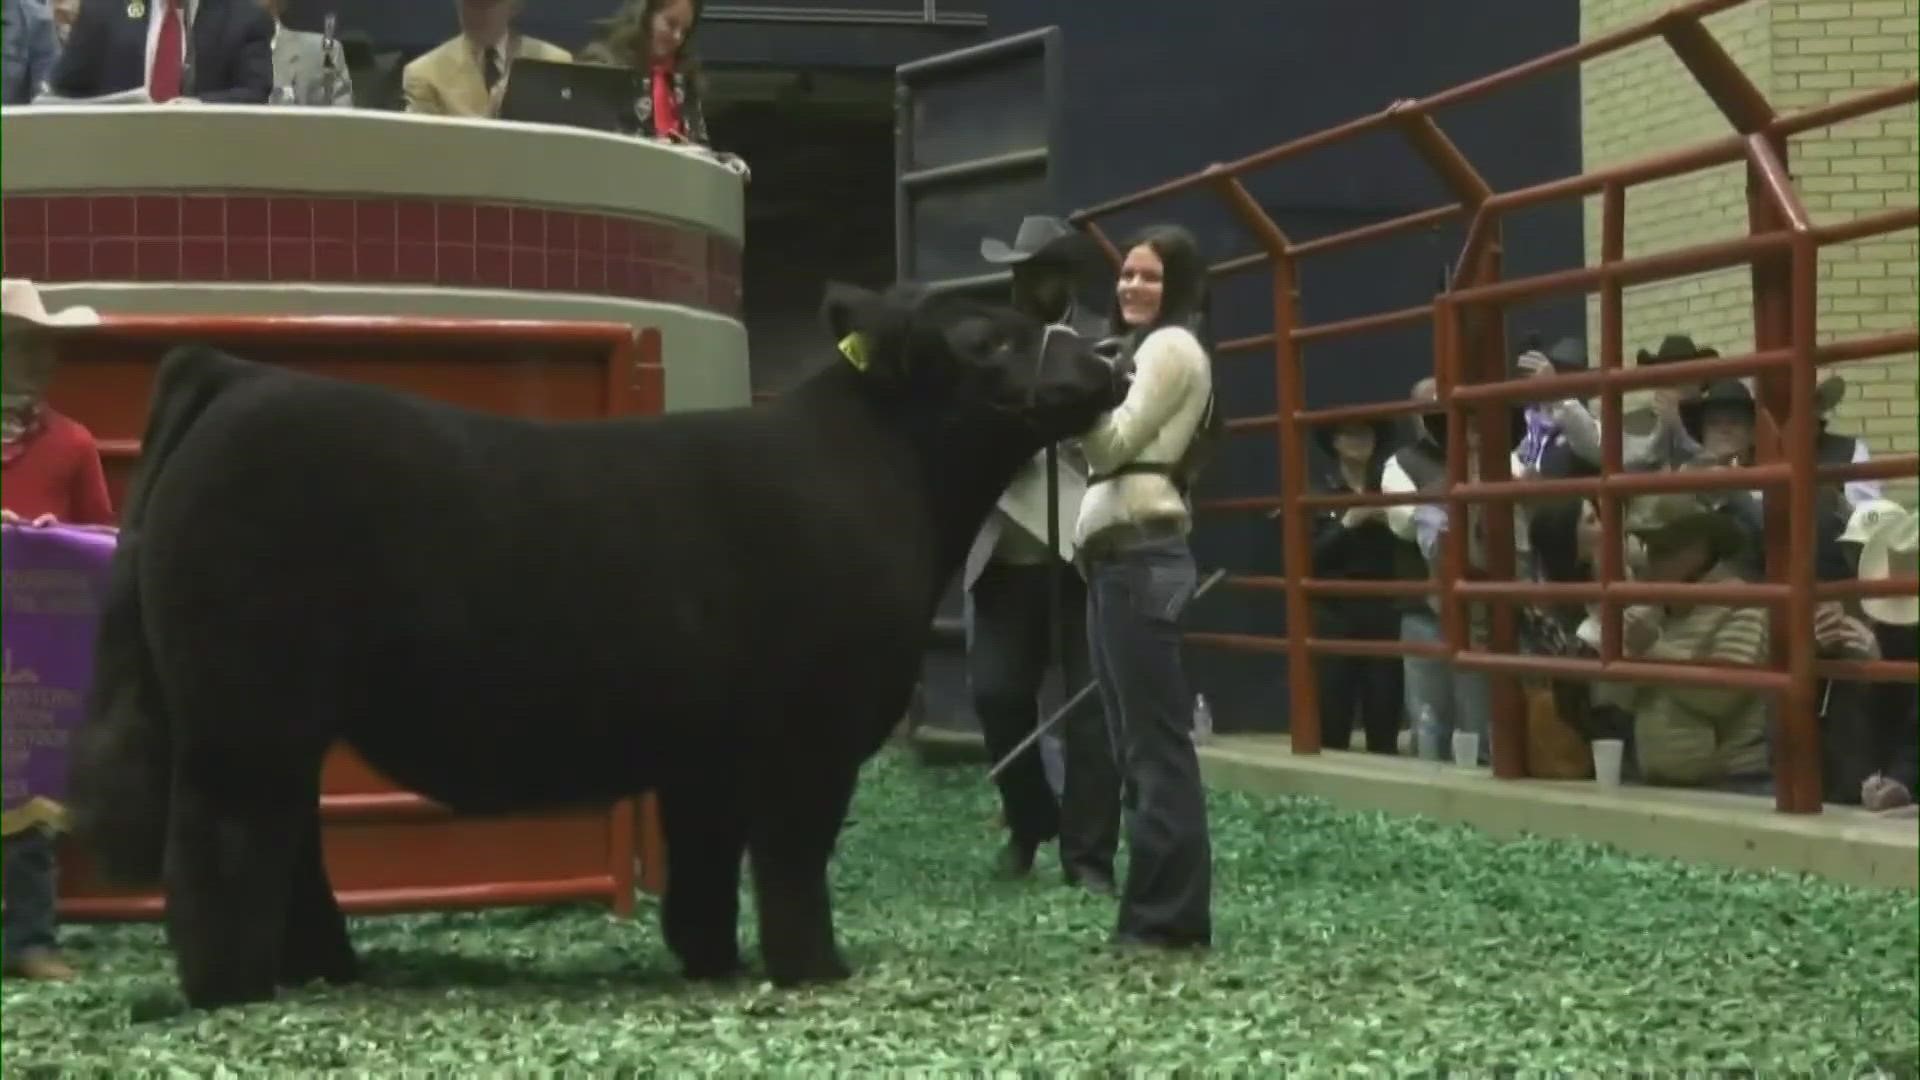 The cow belonged to 15-year-old Sadie Wampler from Randall County 4-H.